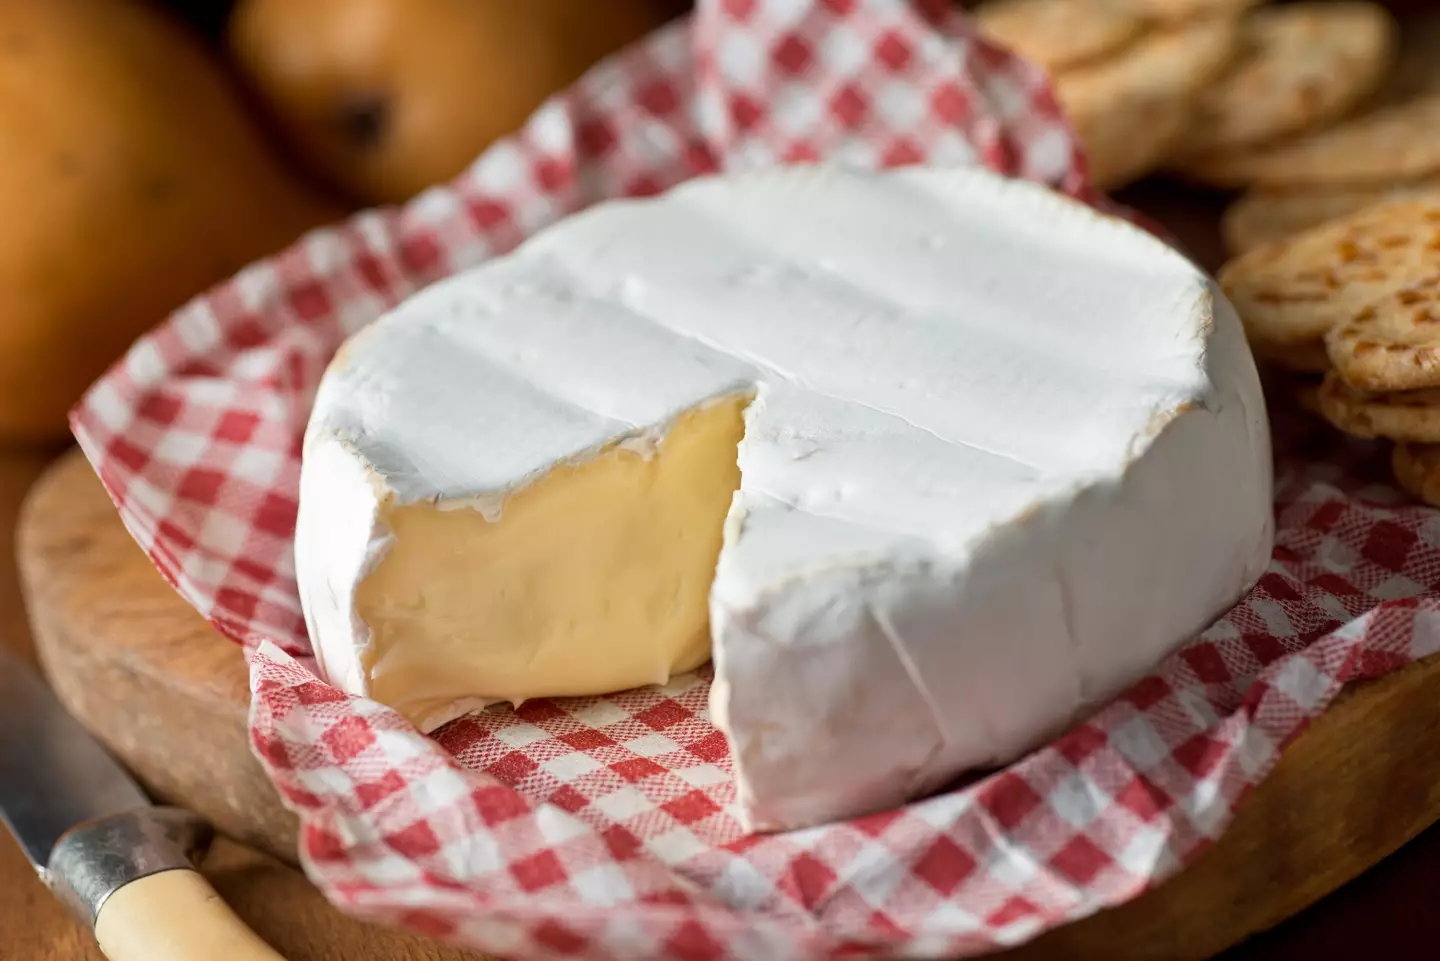 That's some nice brie you've got there, would be a shame if someone filled it up with MDMA.